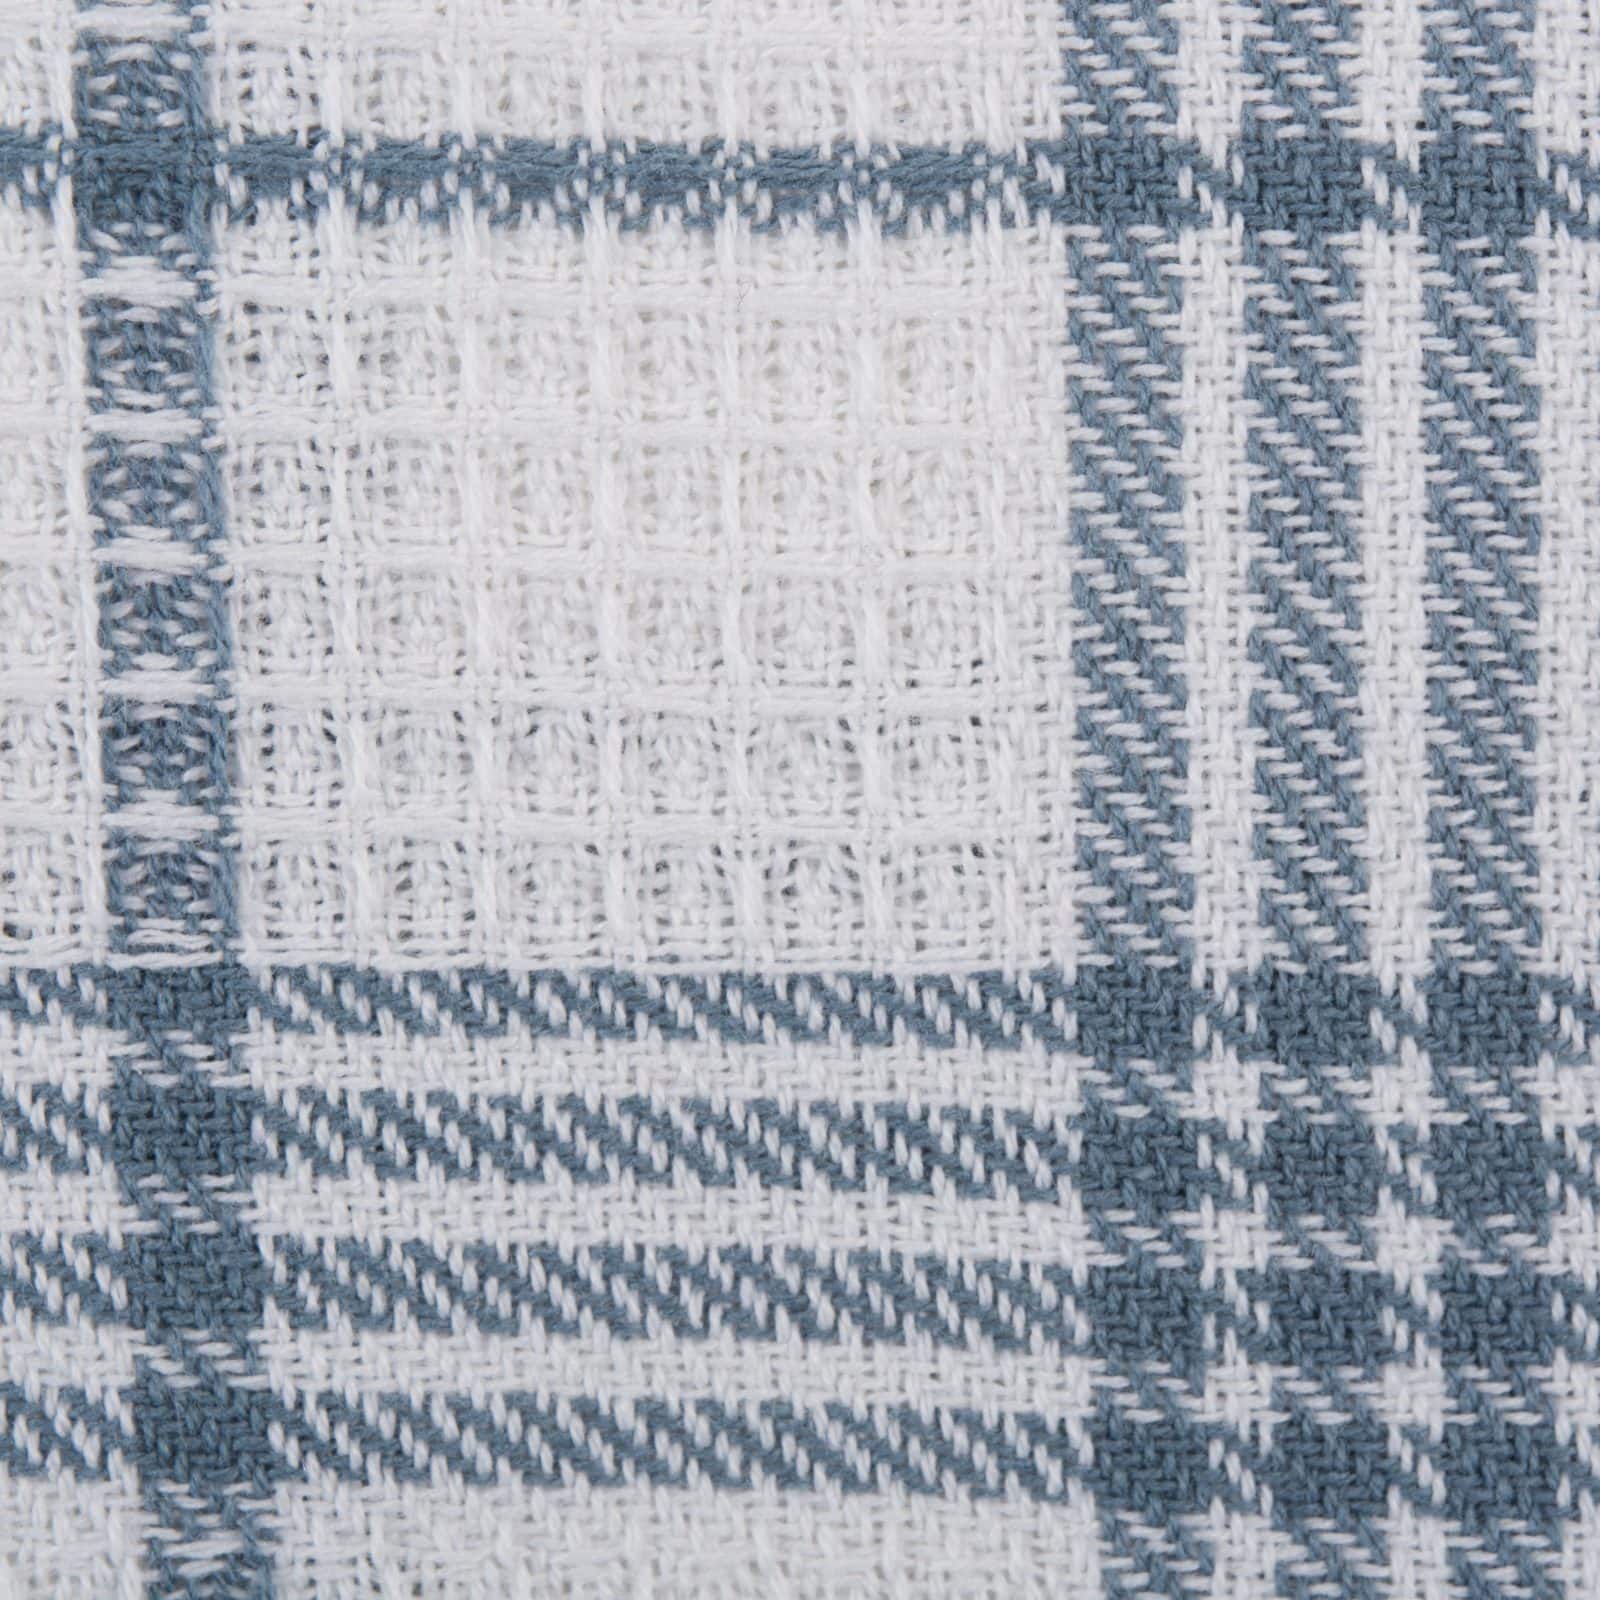 13×13 Waffle Weave Dish Cloth - Navy – Miller's Dry Goods